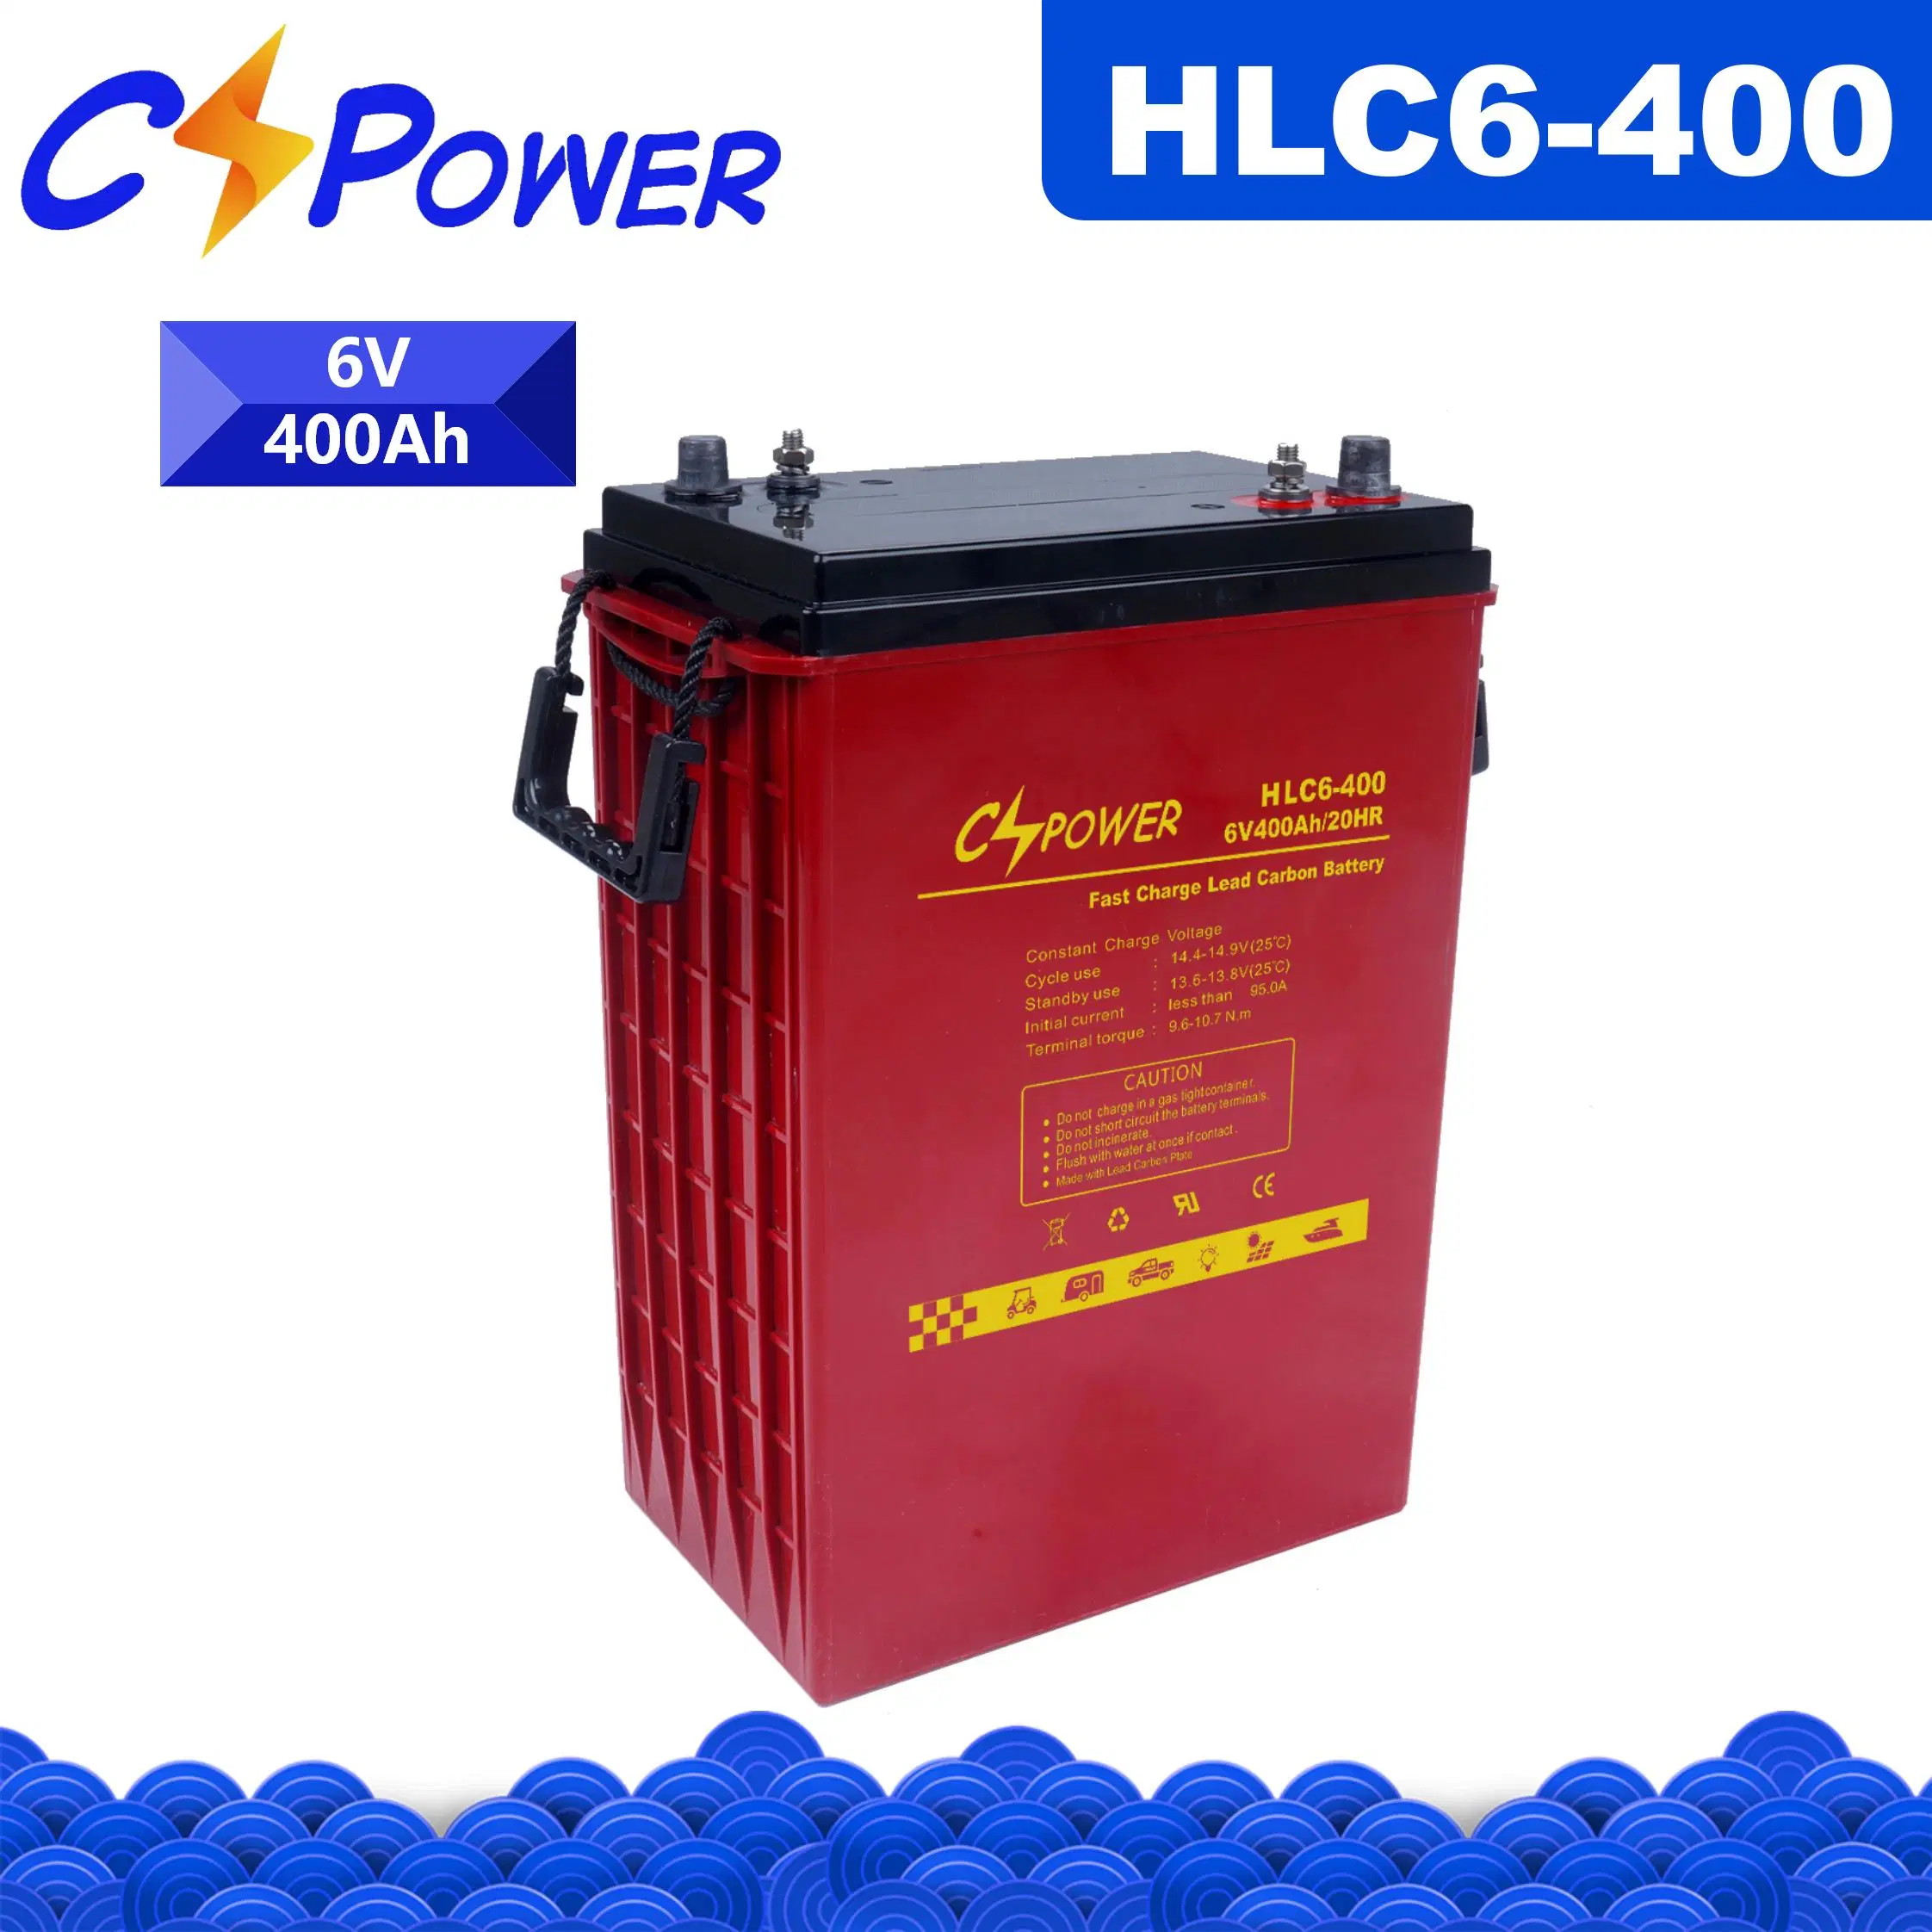 Cspower Battery Hlc 6-400 Fast Charge Long-Life-Lead-Carbon-Battery/UPS-Battery/Inverter-Battery/Maintenance-Free Battery/Energy-Storage-System-Battery